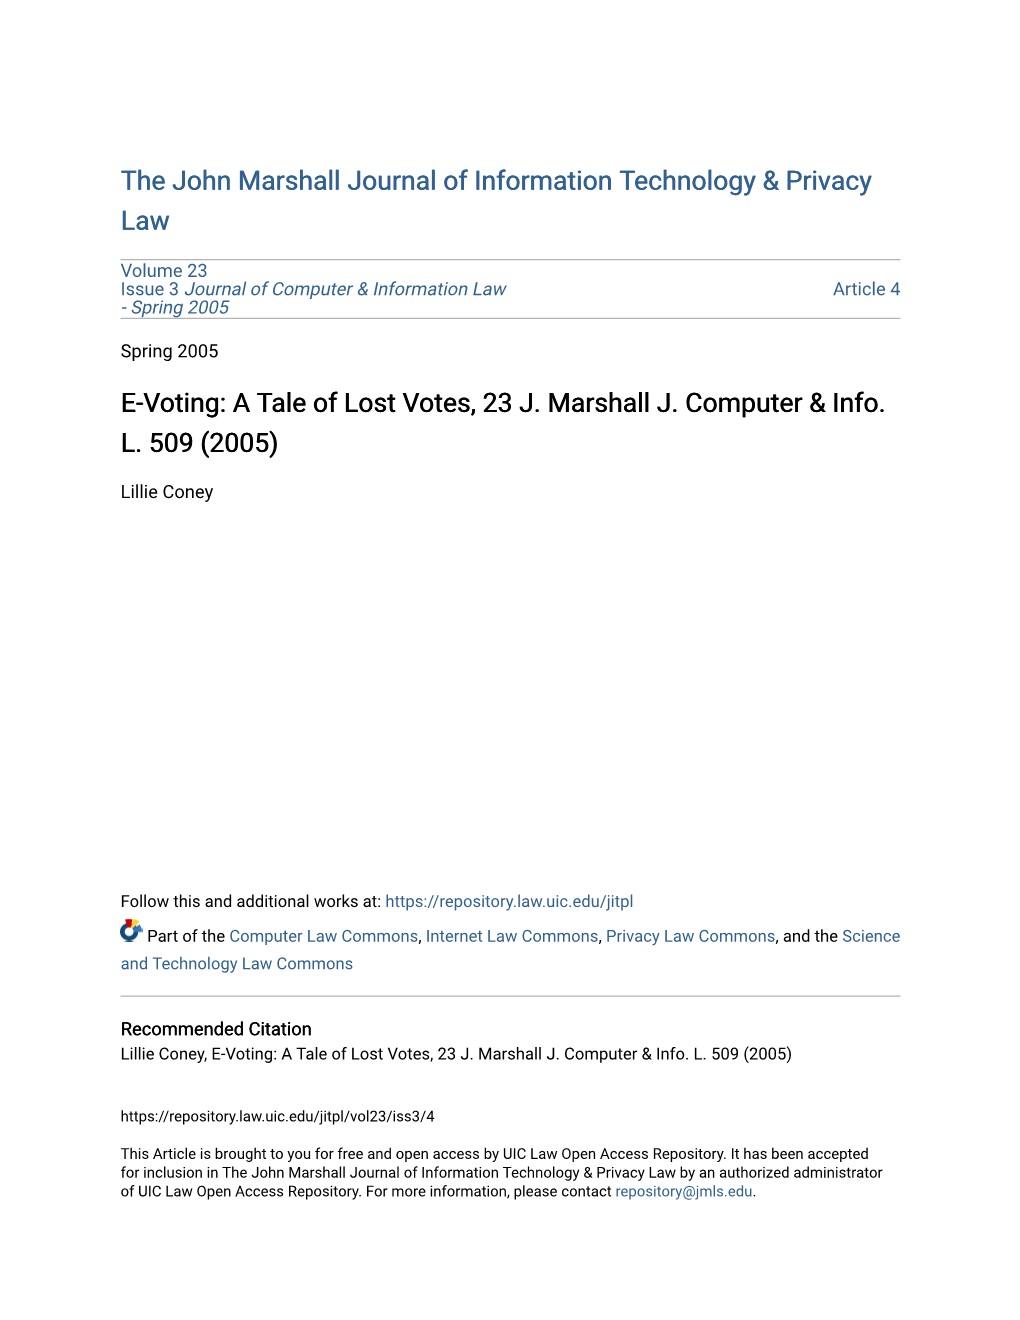 A Tale of Lost Votes, 23 J. Marshall J. Computer & Info. L. 509 (2005)